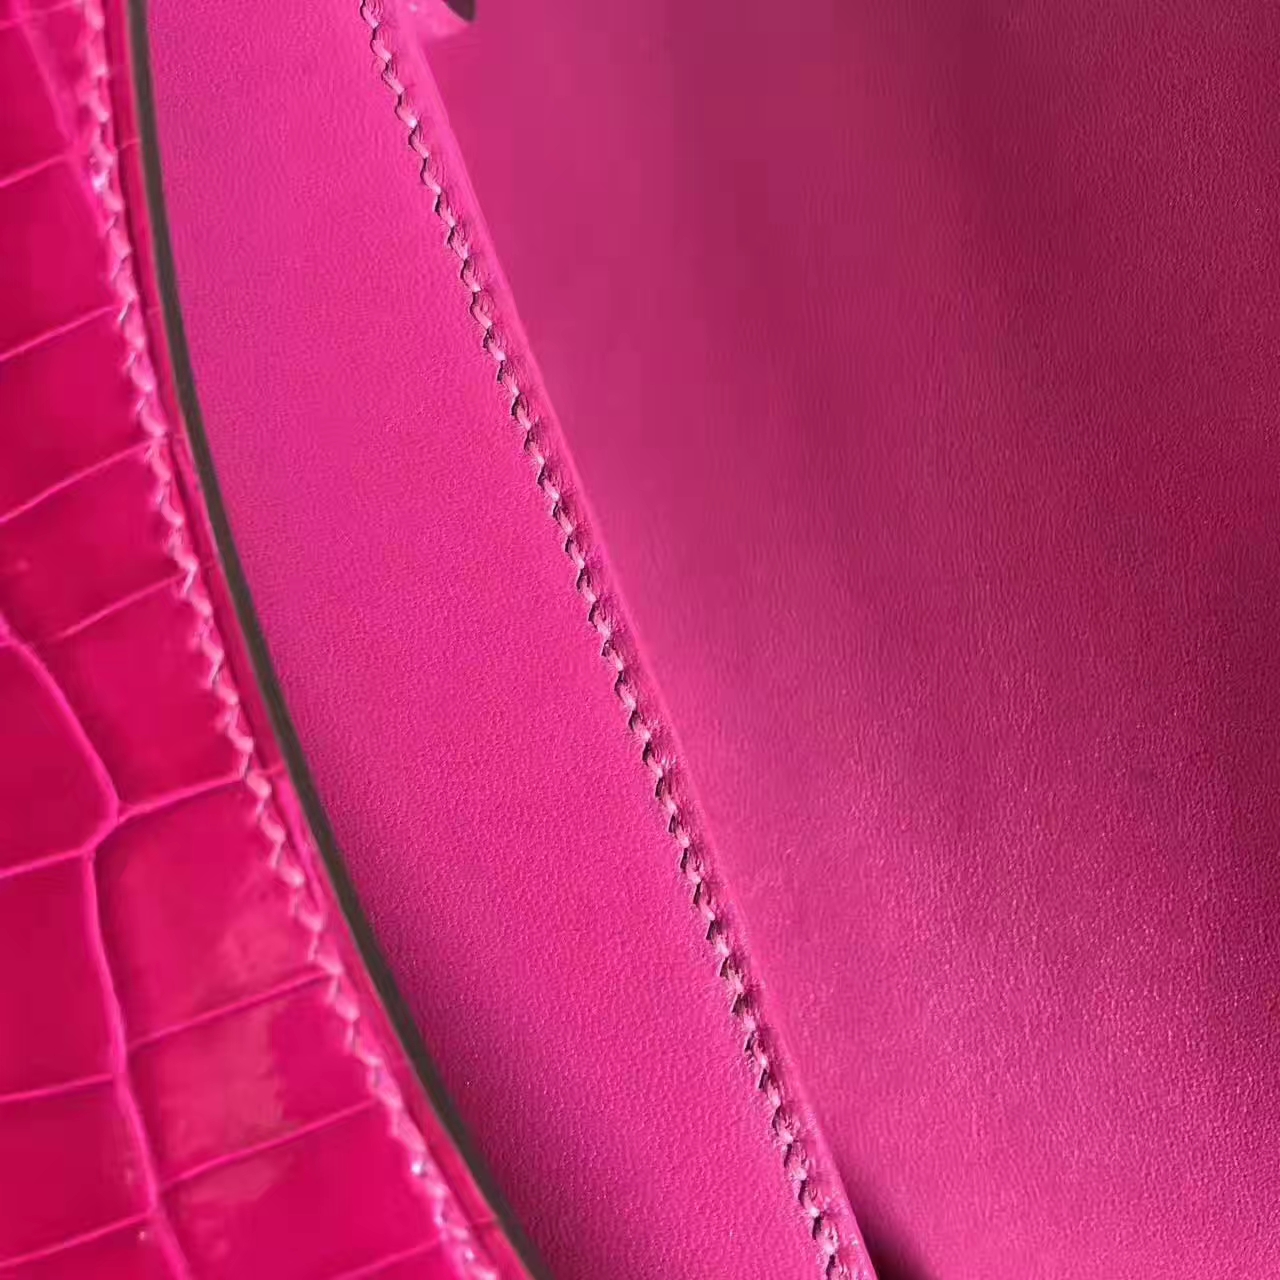 New Arrival Hermes Hot Pink Crocodile Shiny Leather Constance Bag19cm